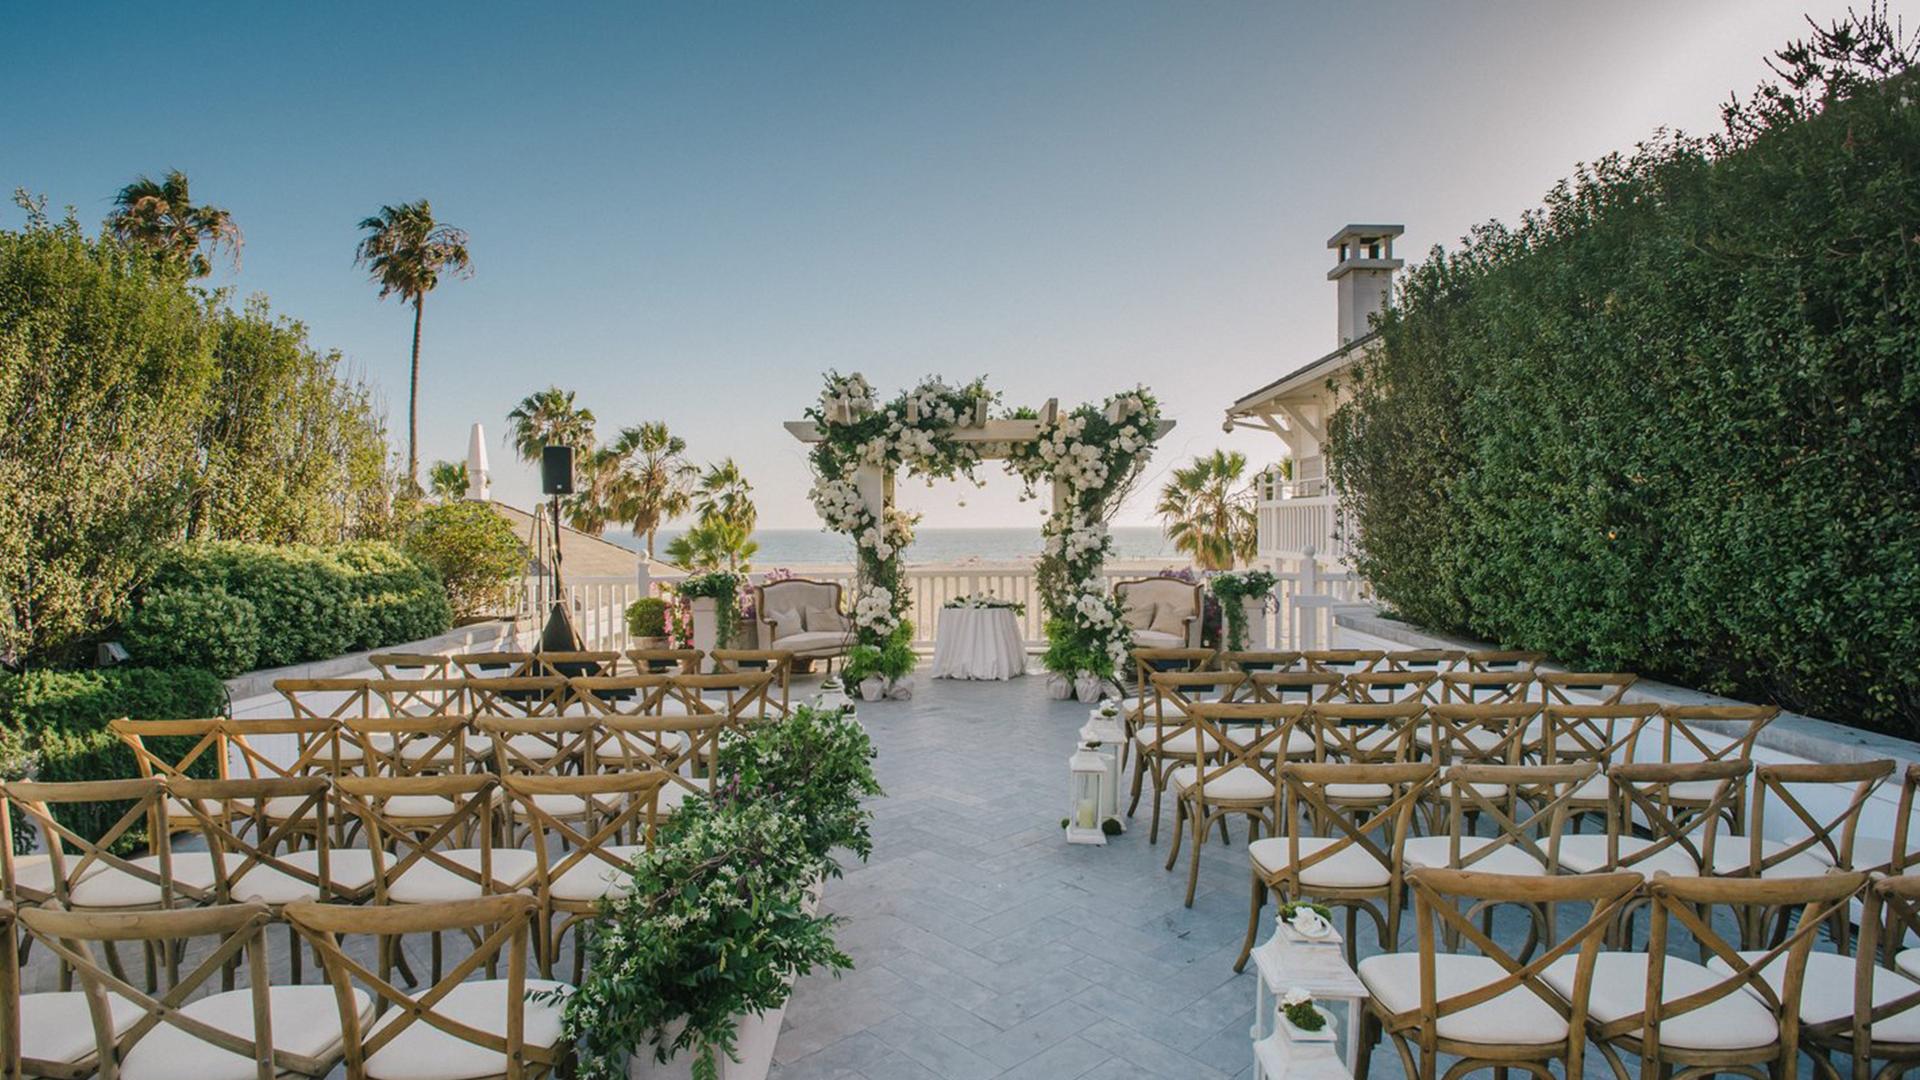 Wedding Ceremony Venues for Rent in Los Angeles, CA